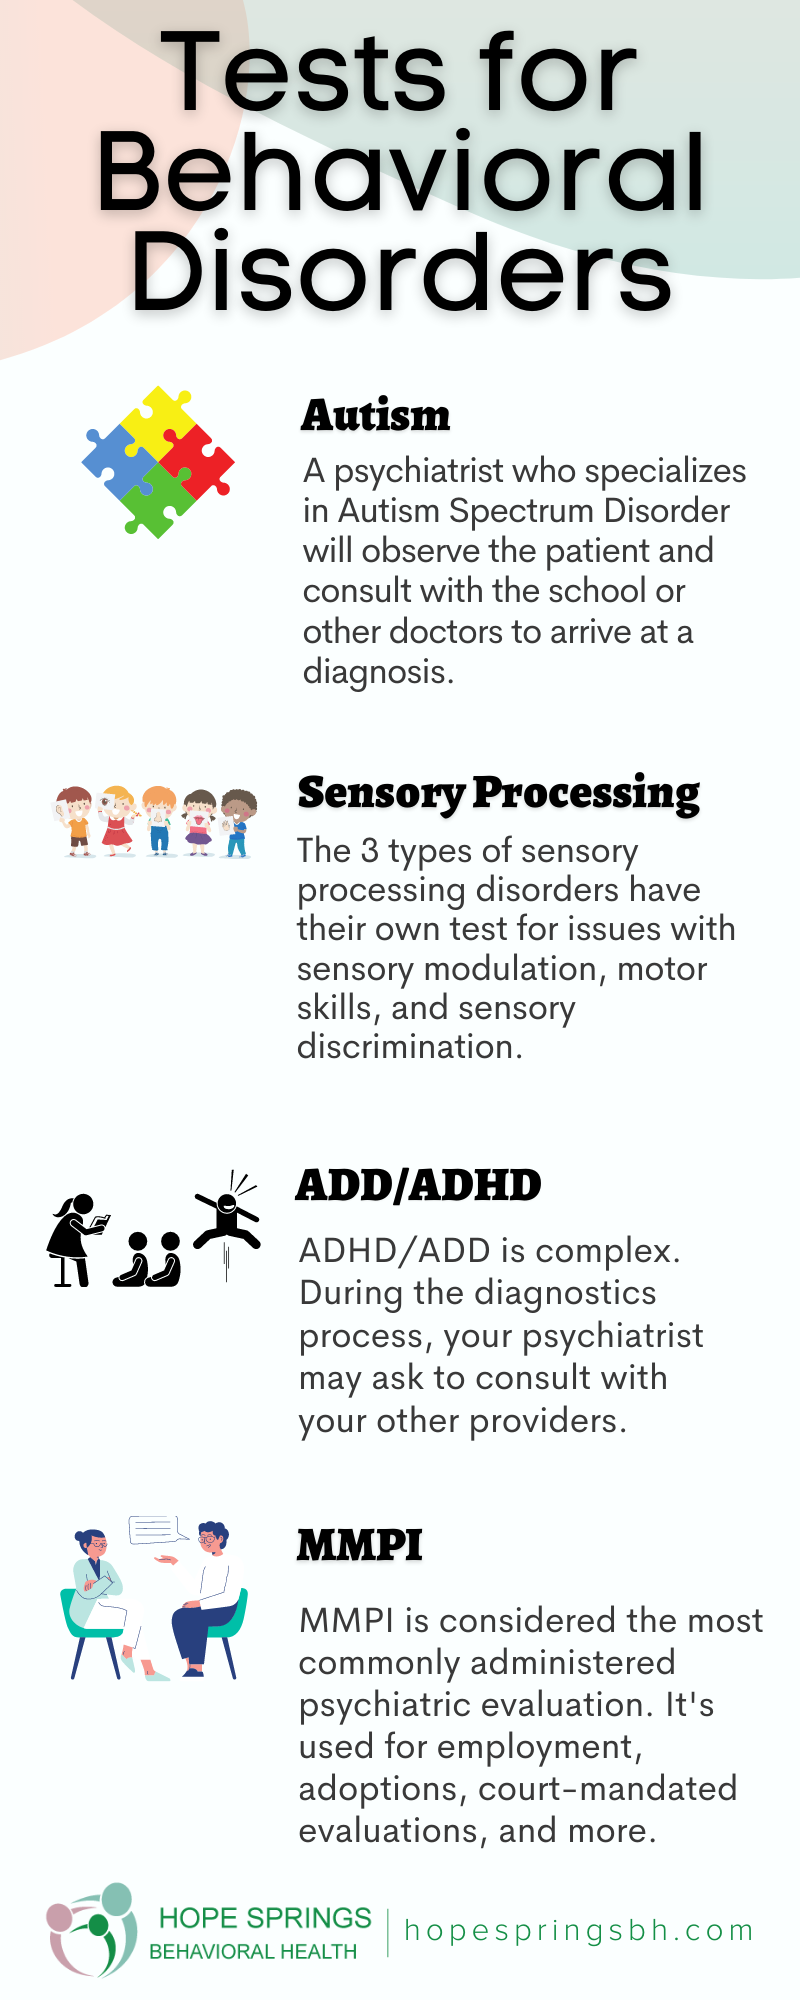 An infographic explaining the tests performed for behavioral disorders